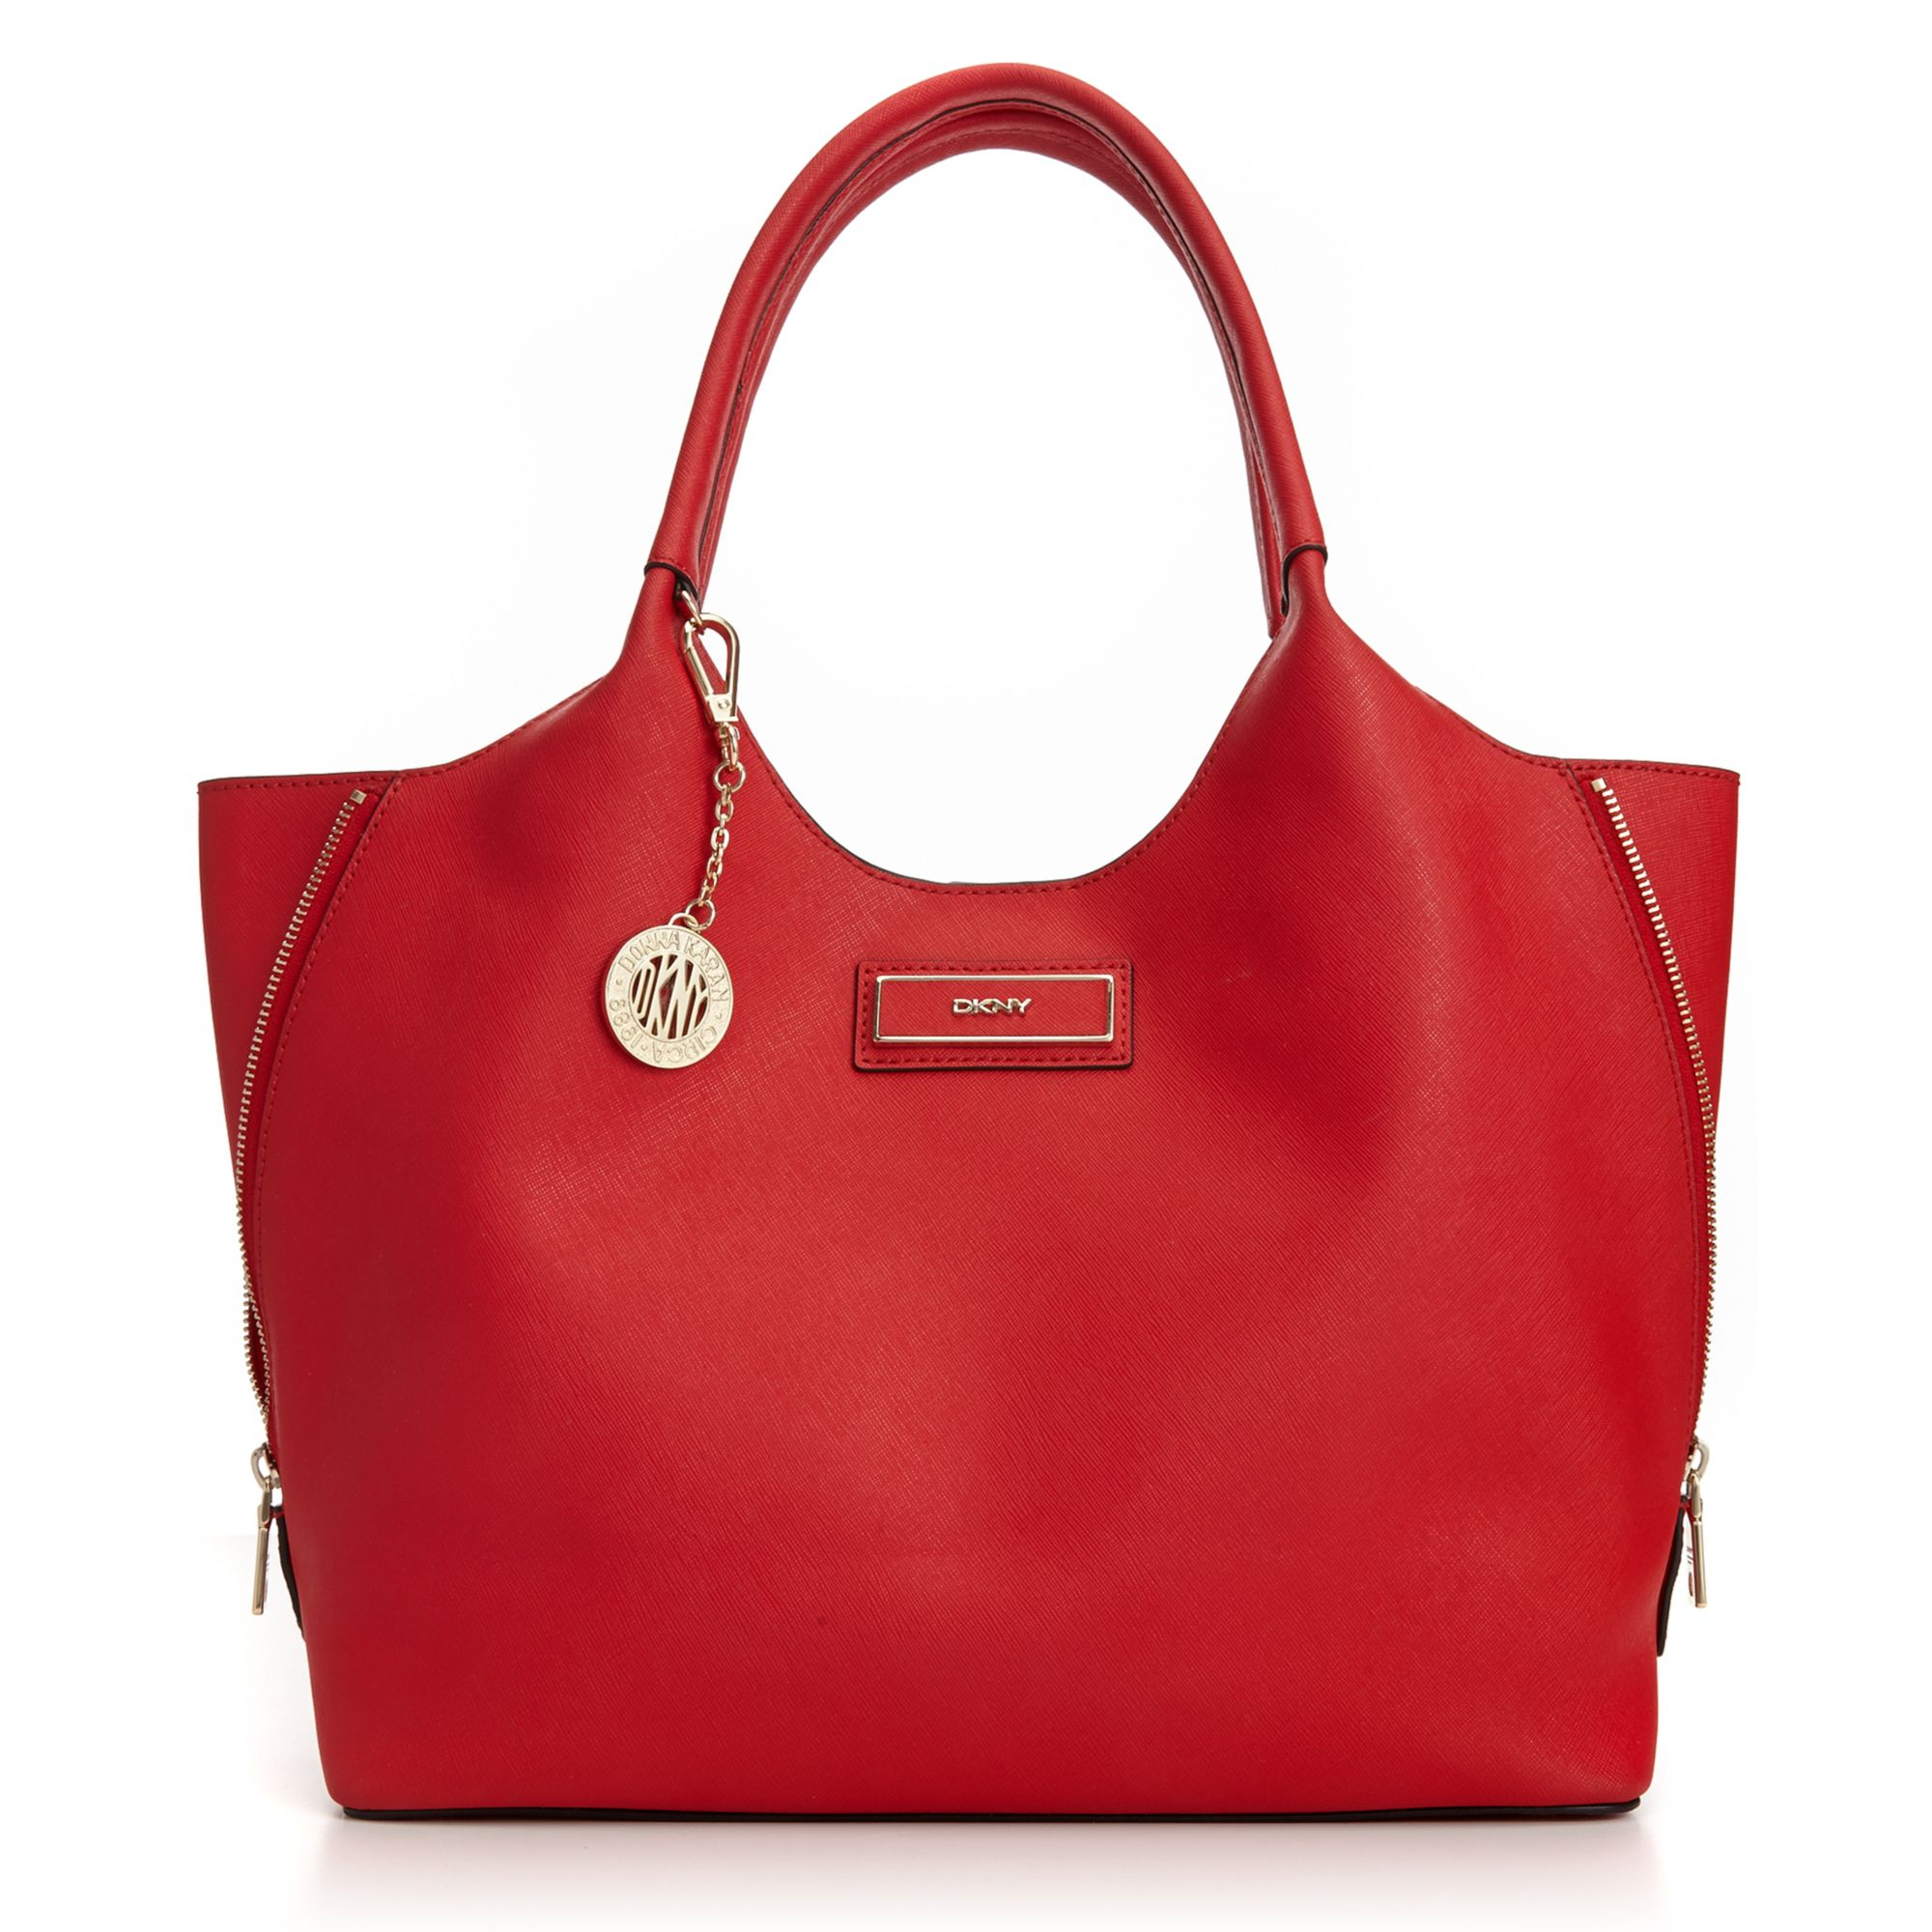 Dkny Saffiano East West Zip Tote in Red | Lyst